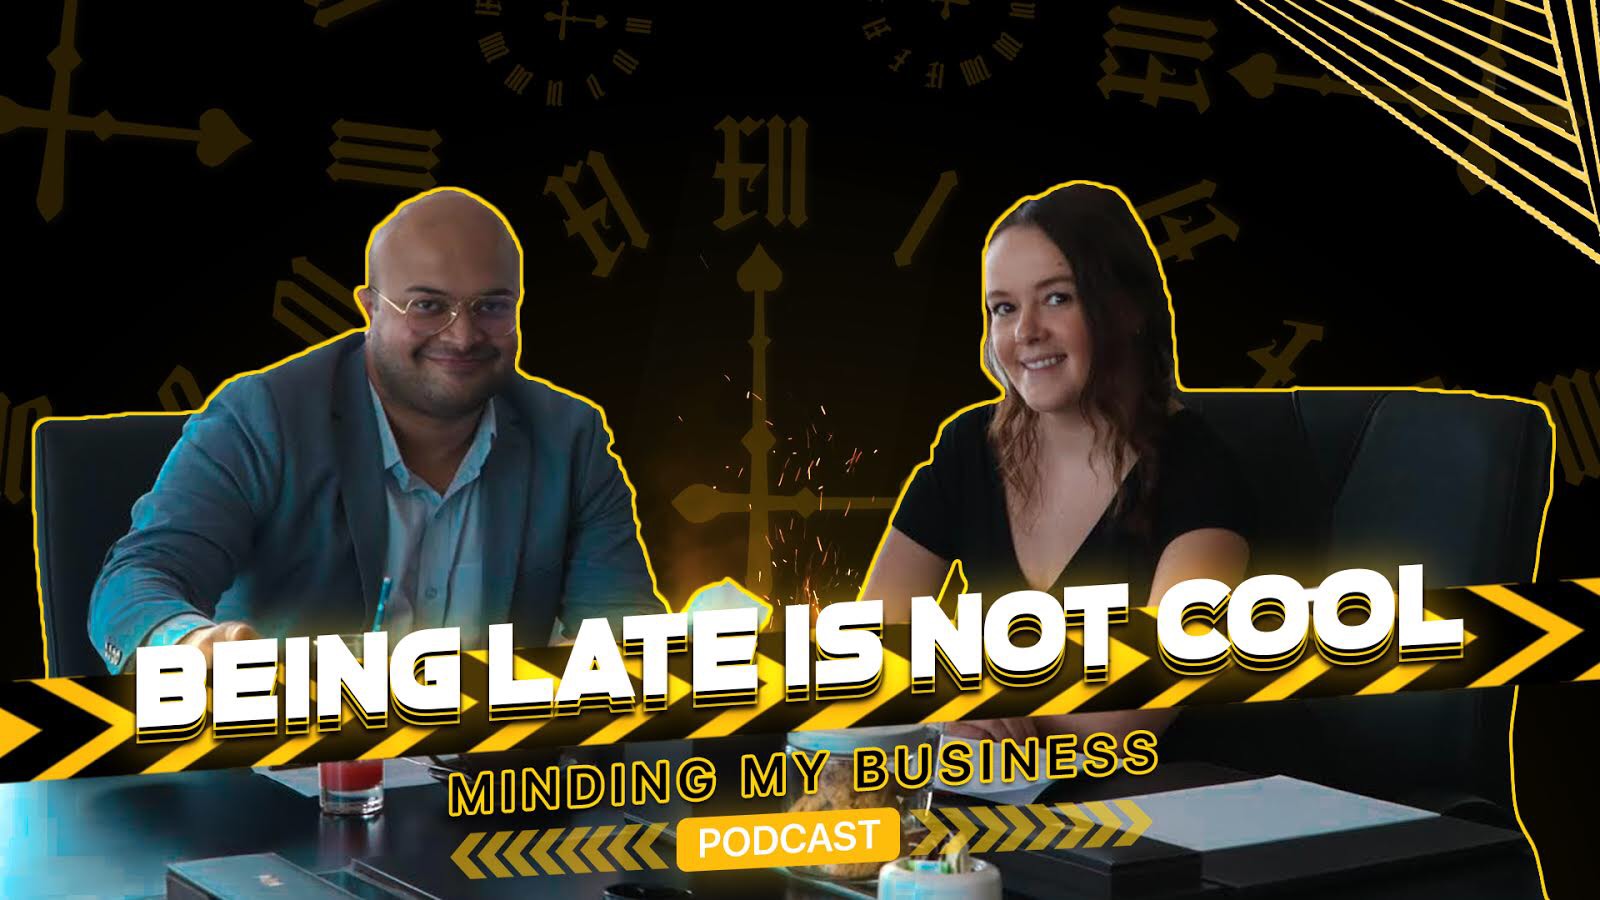 Have you ever been late to work ? - Funny Podcast Interview